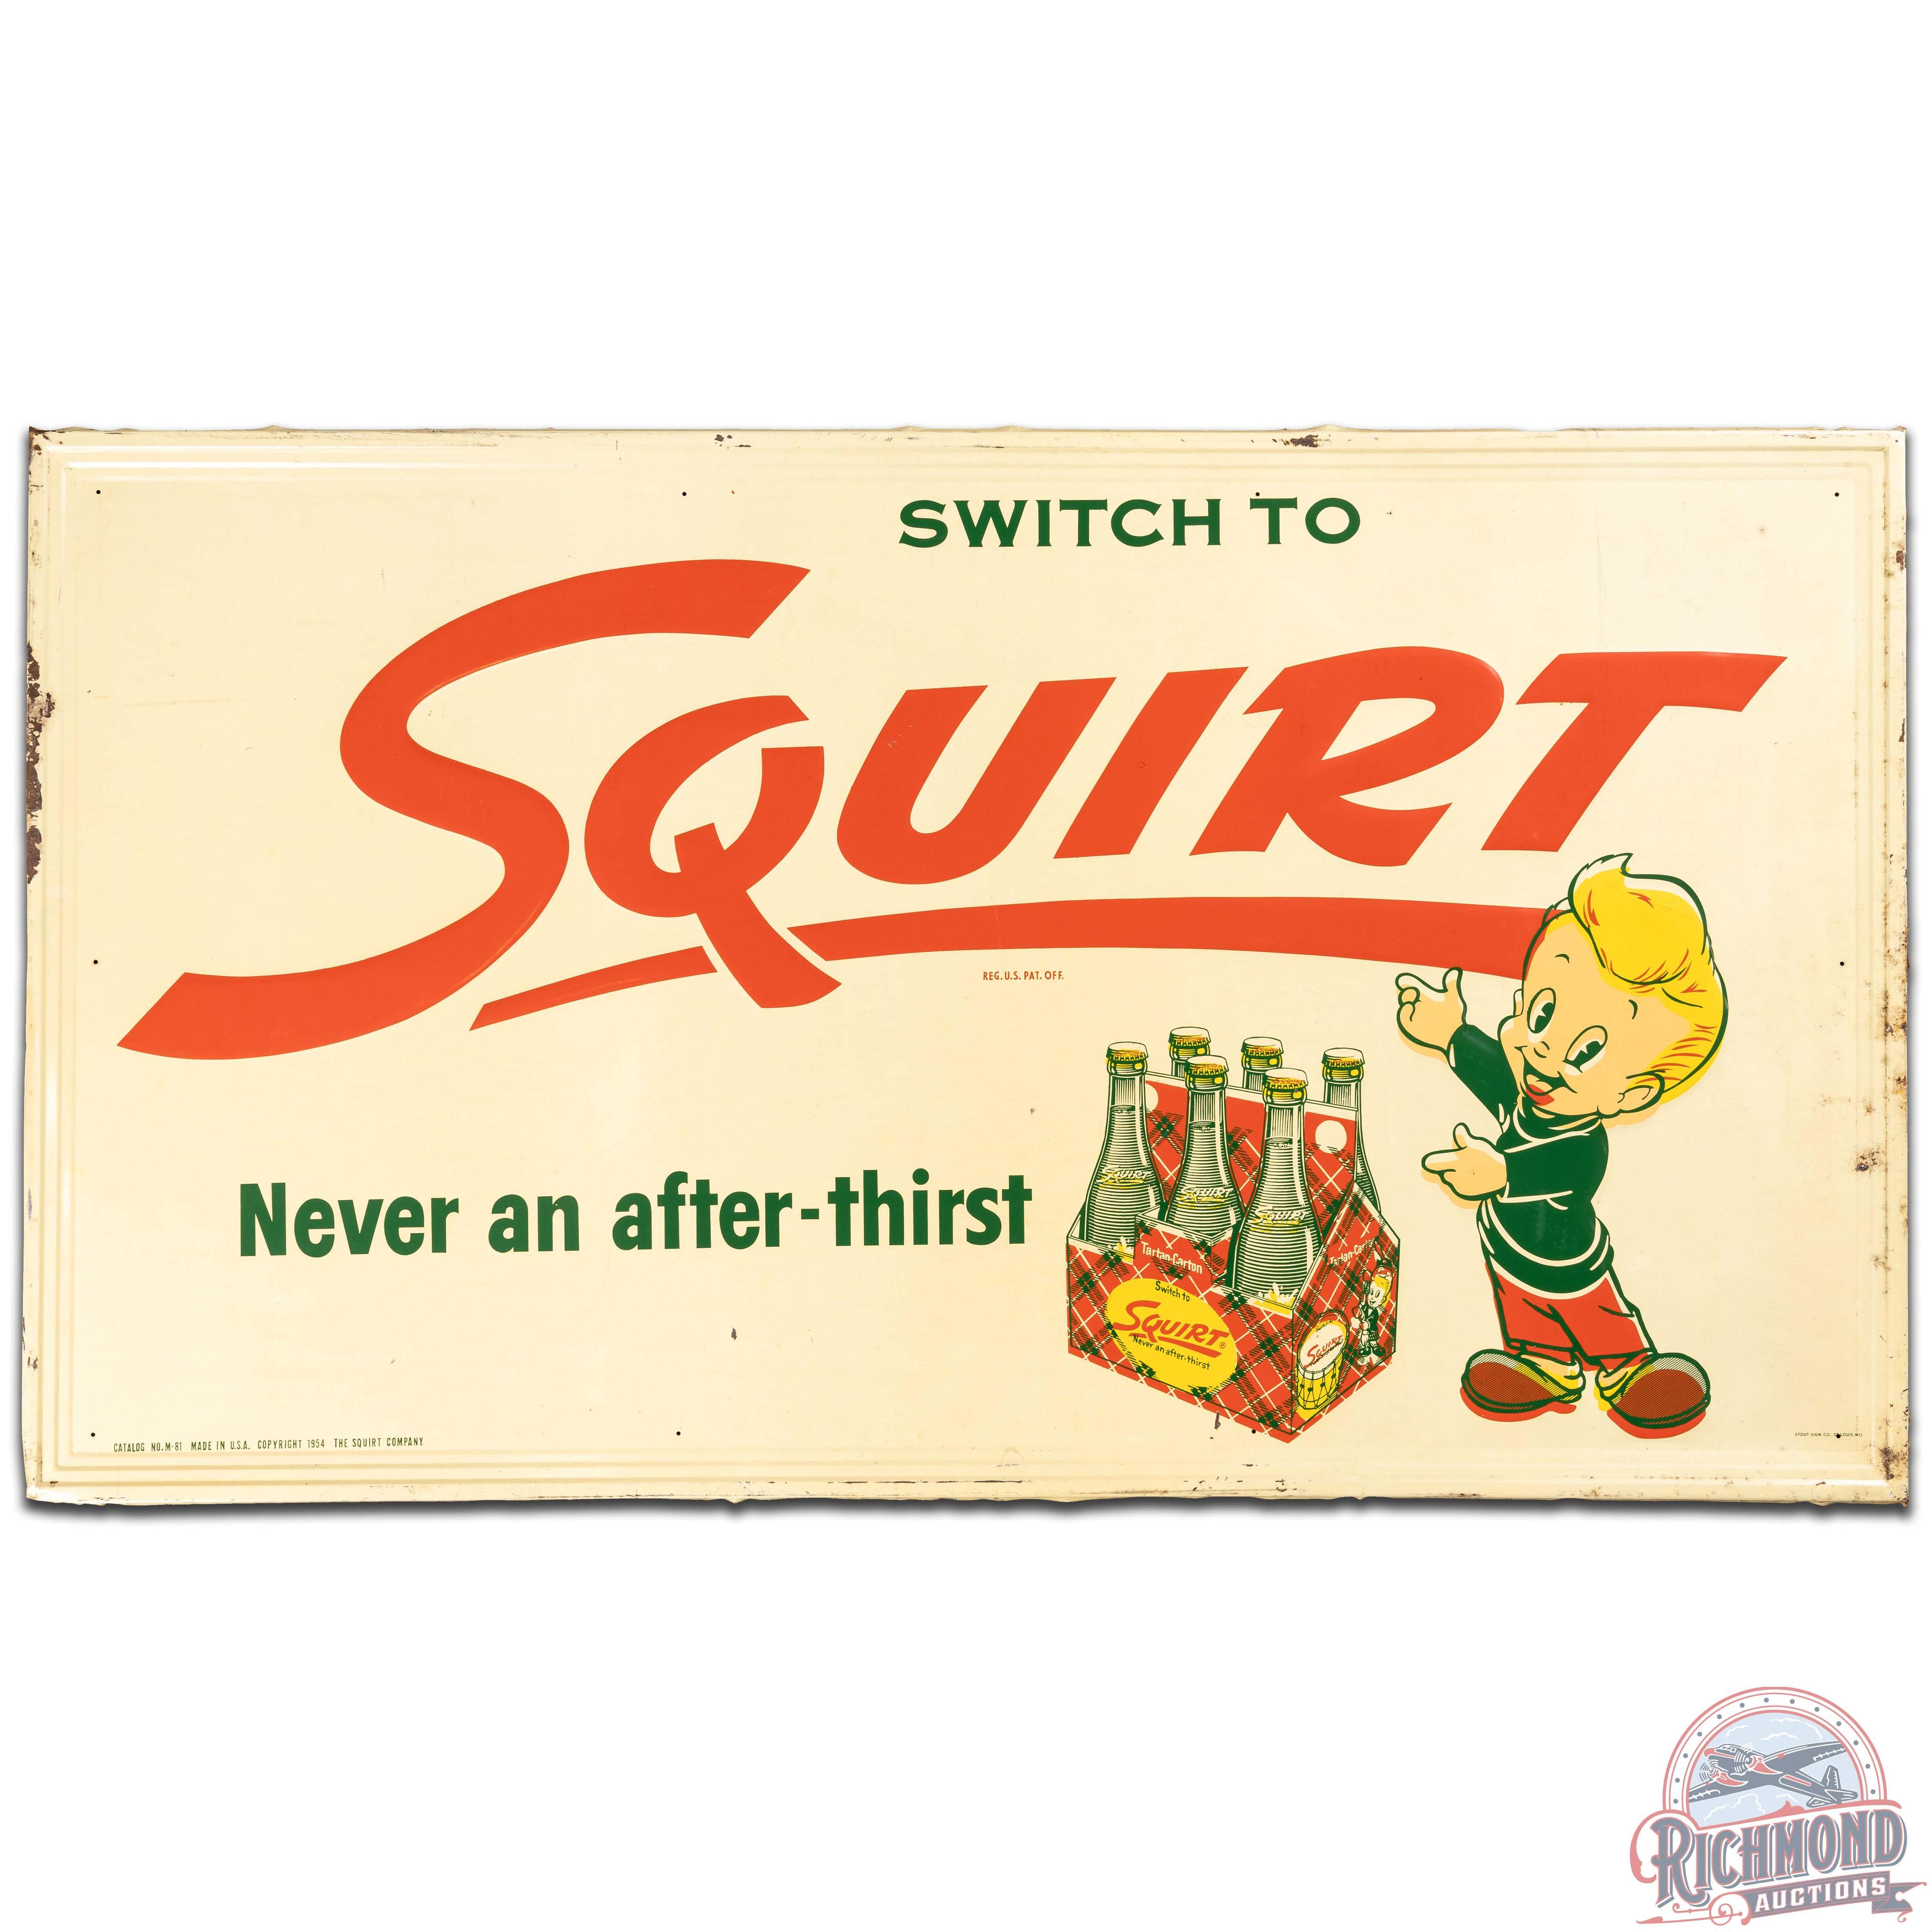 NOS Squirt Never An After-Thirst Emb. SS Tin Sign w/ 6 Pack & Squirt Boy